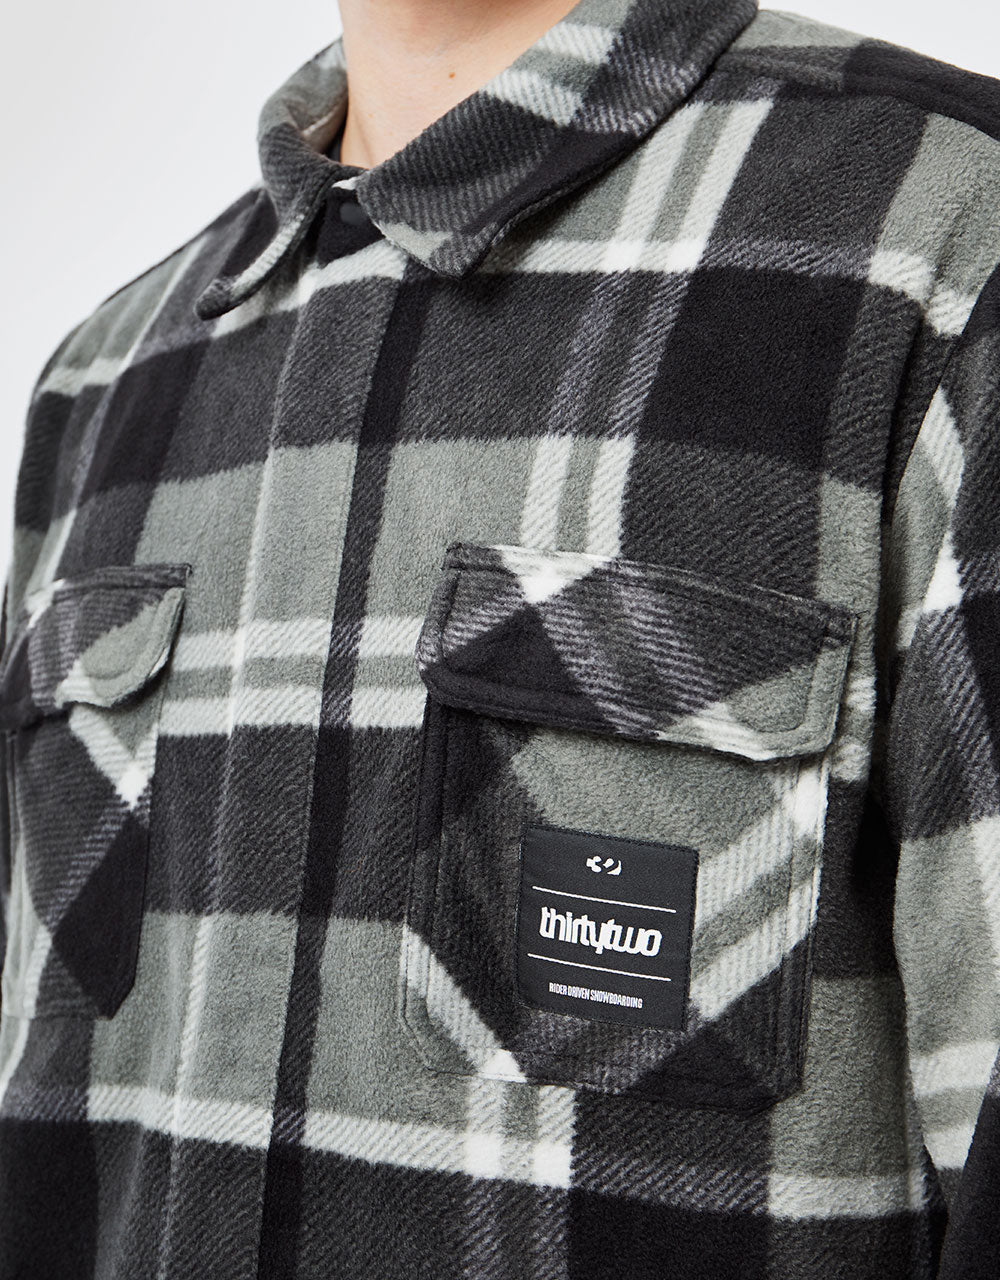 ThirtyTwo Rest Stop L/S Shirt - Grey